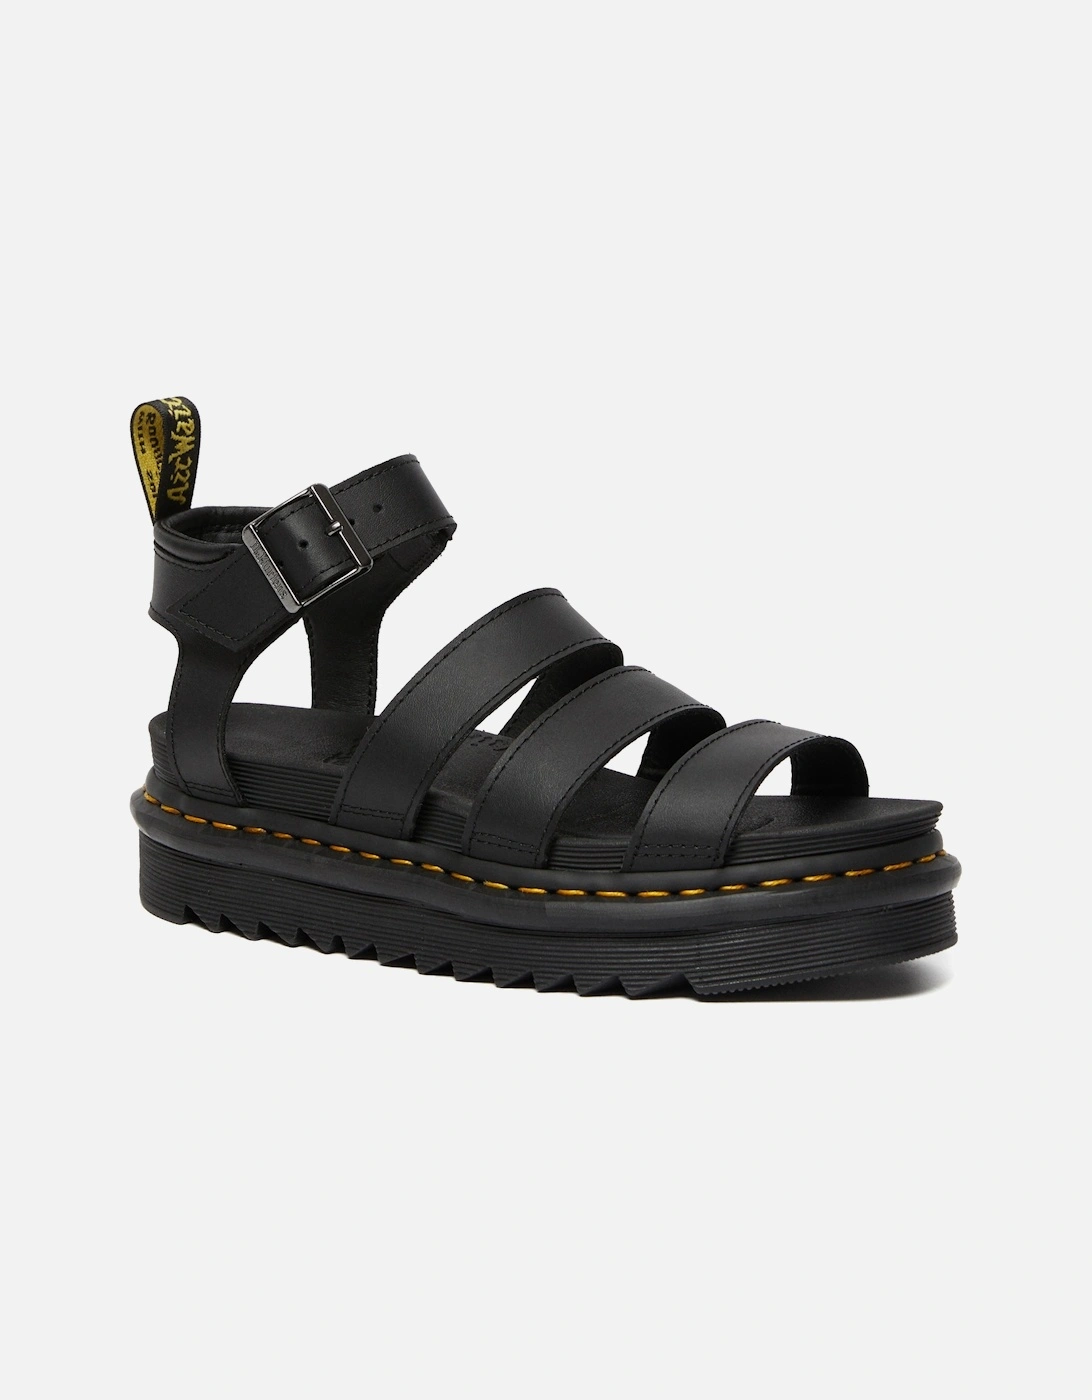 Dr. Martens Womens Blaire Hydro Leather Strap Sandals (Black), 8 of 7